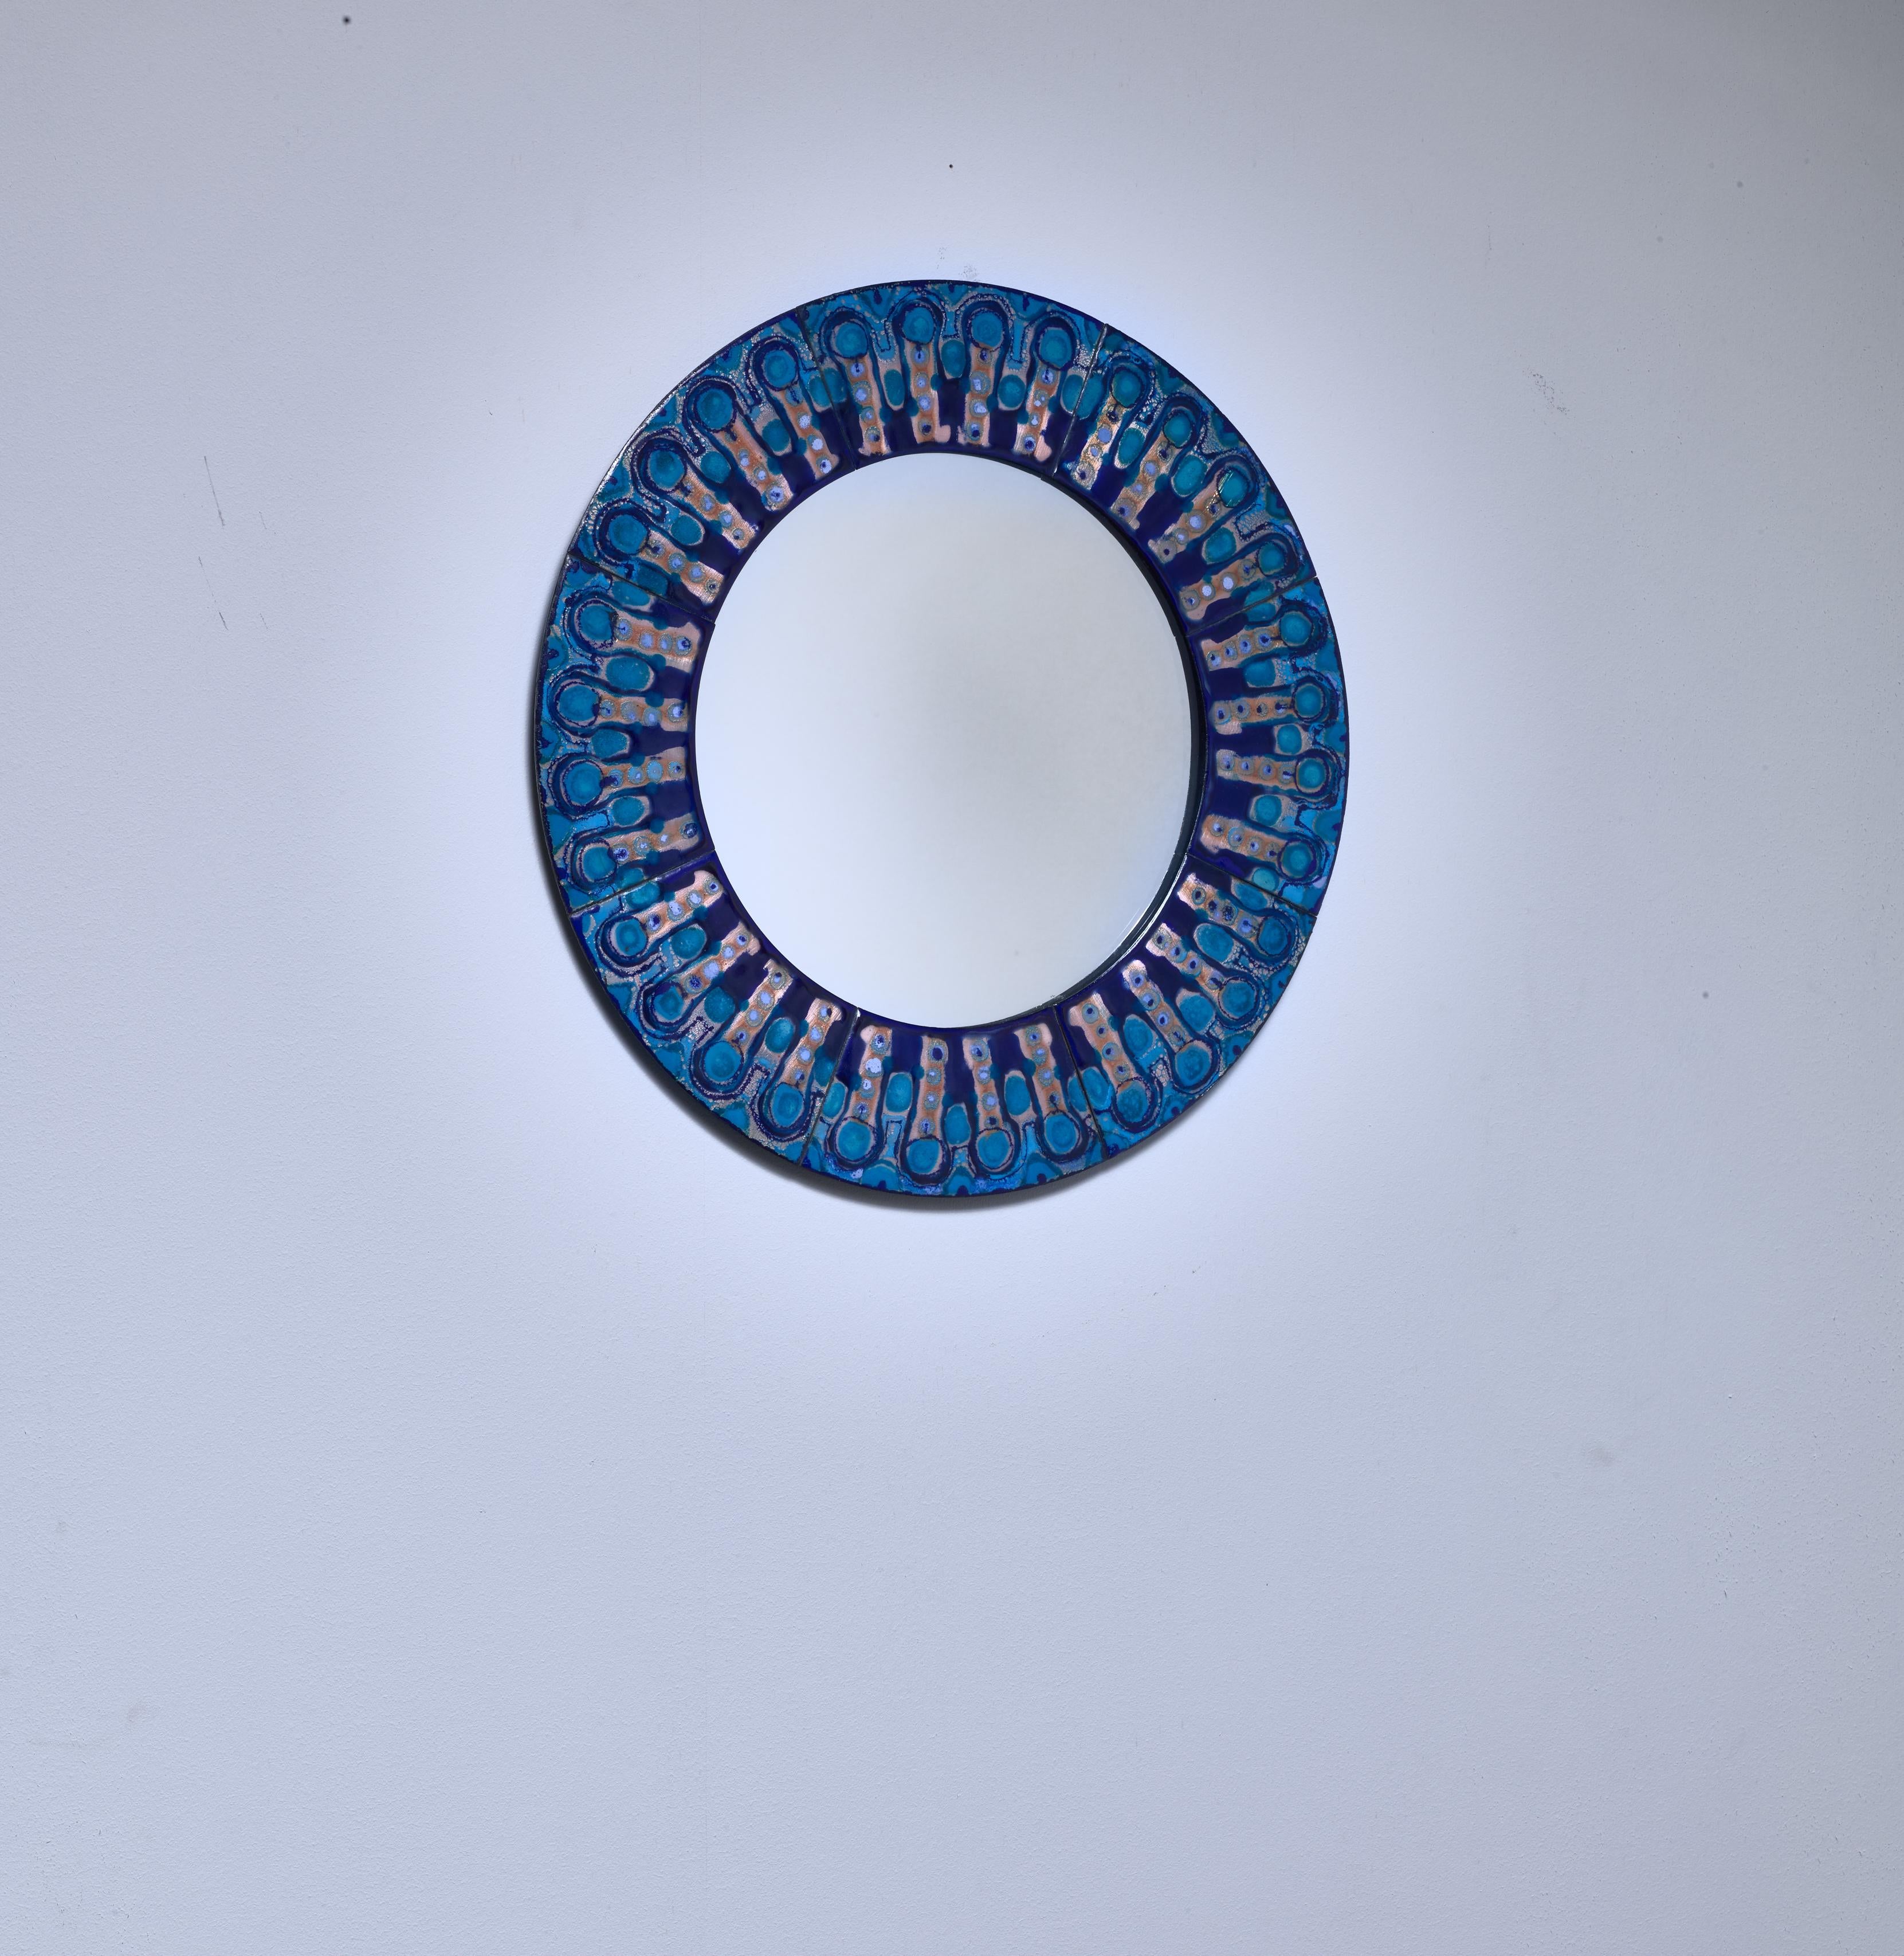 A round wall mirror by Danish designer Bodil Eje (1931-2006). The mirror has a frame made of polychrome enameled copper plates.

We also have a rectangular as well as large round Bodil Eje mirror in blue enamel available.